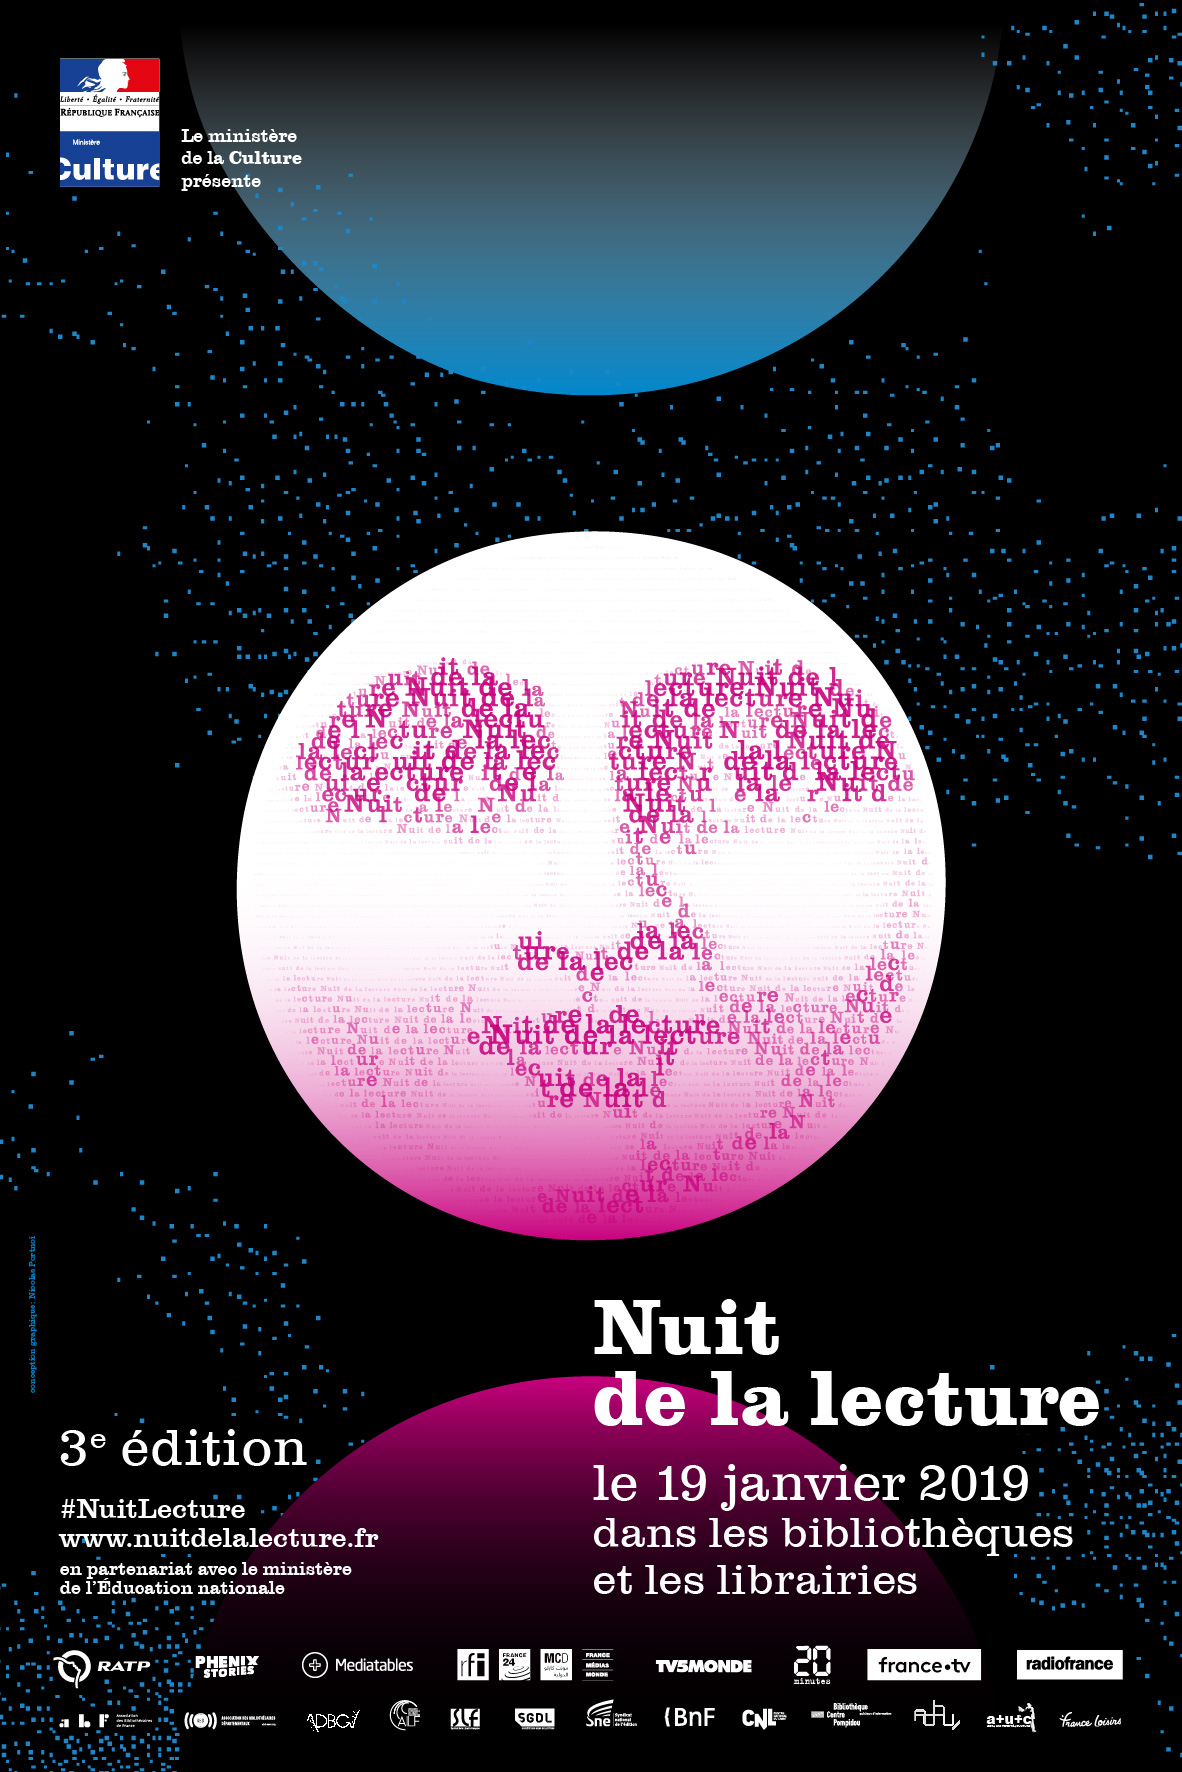 NuitLecture2019 Affiche